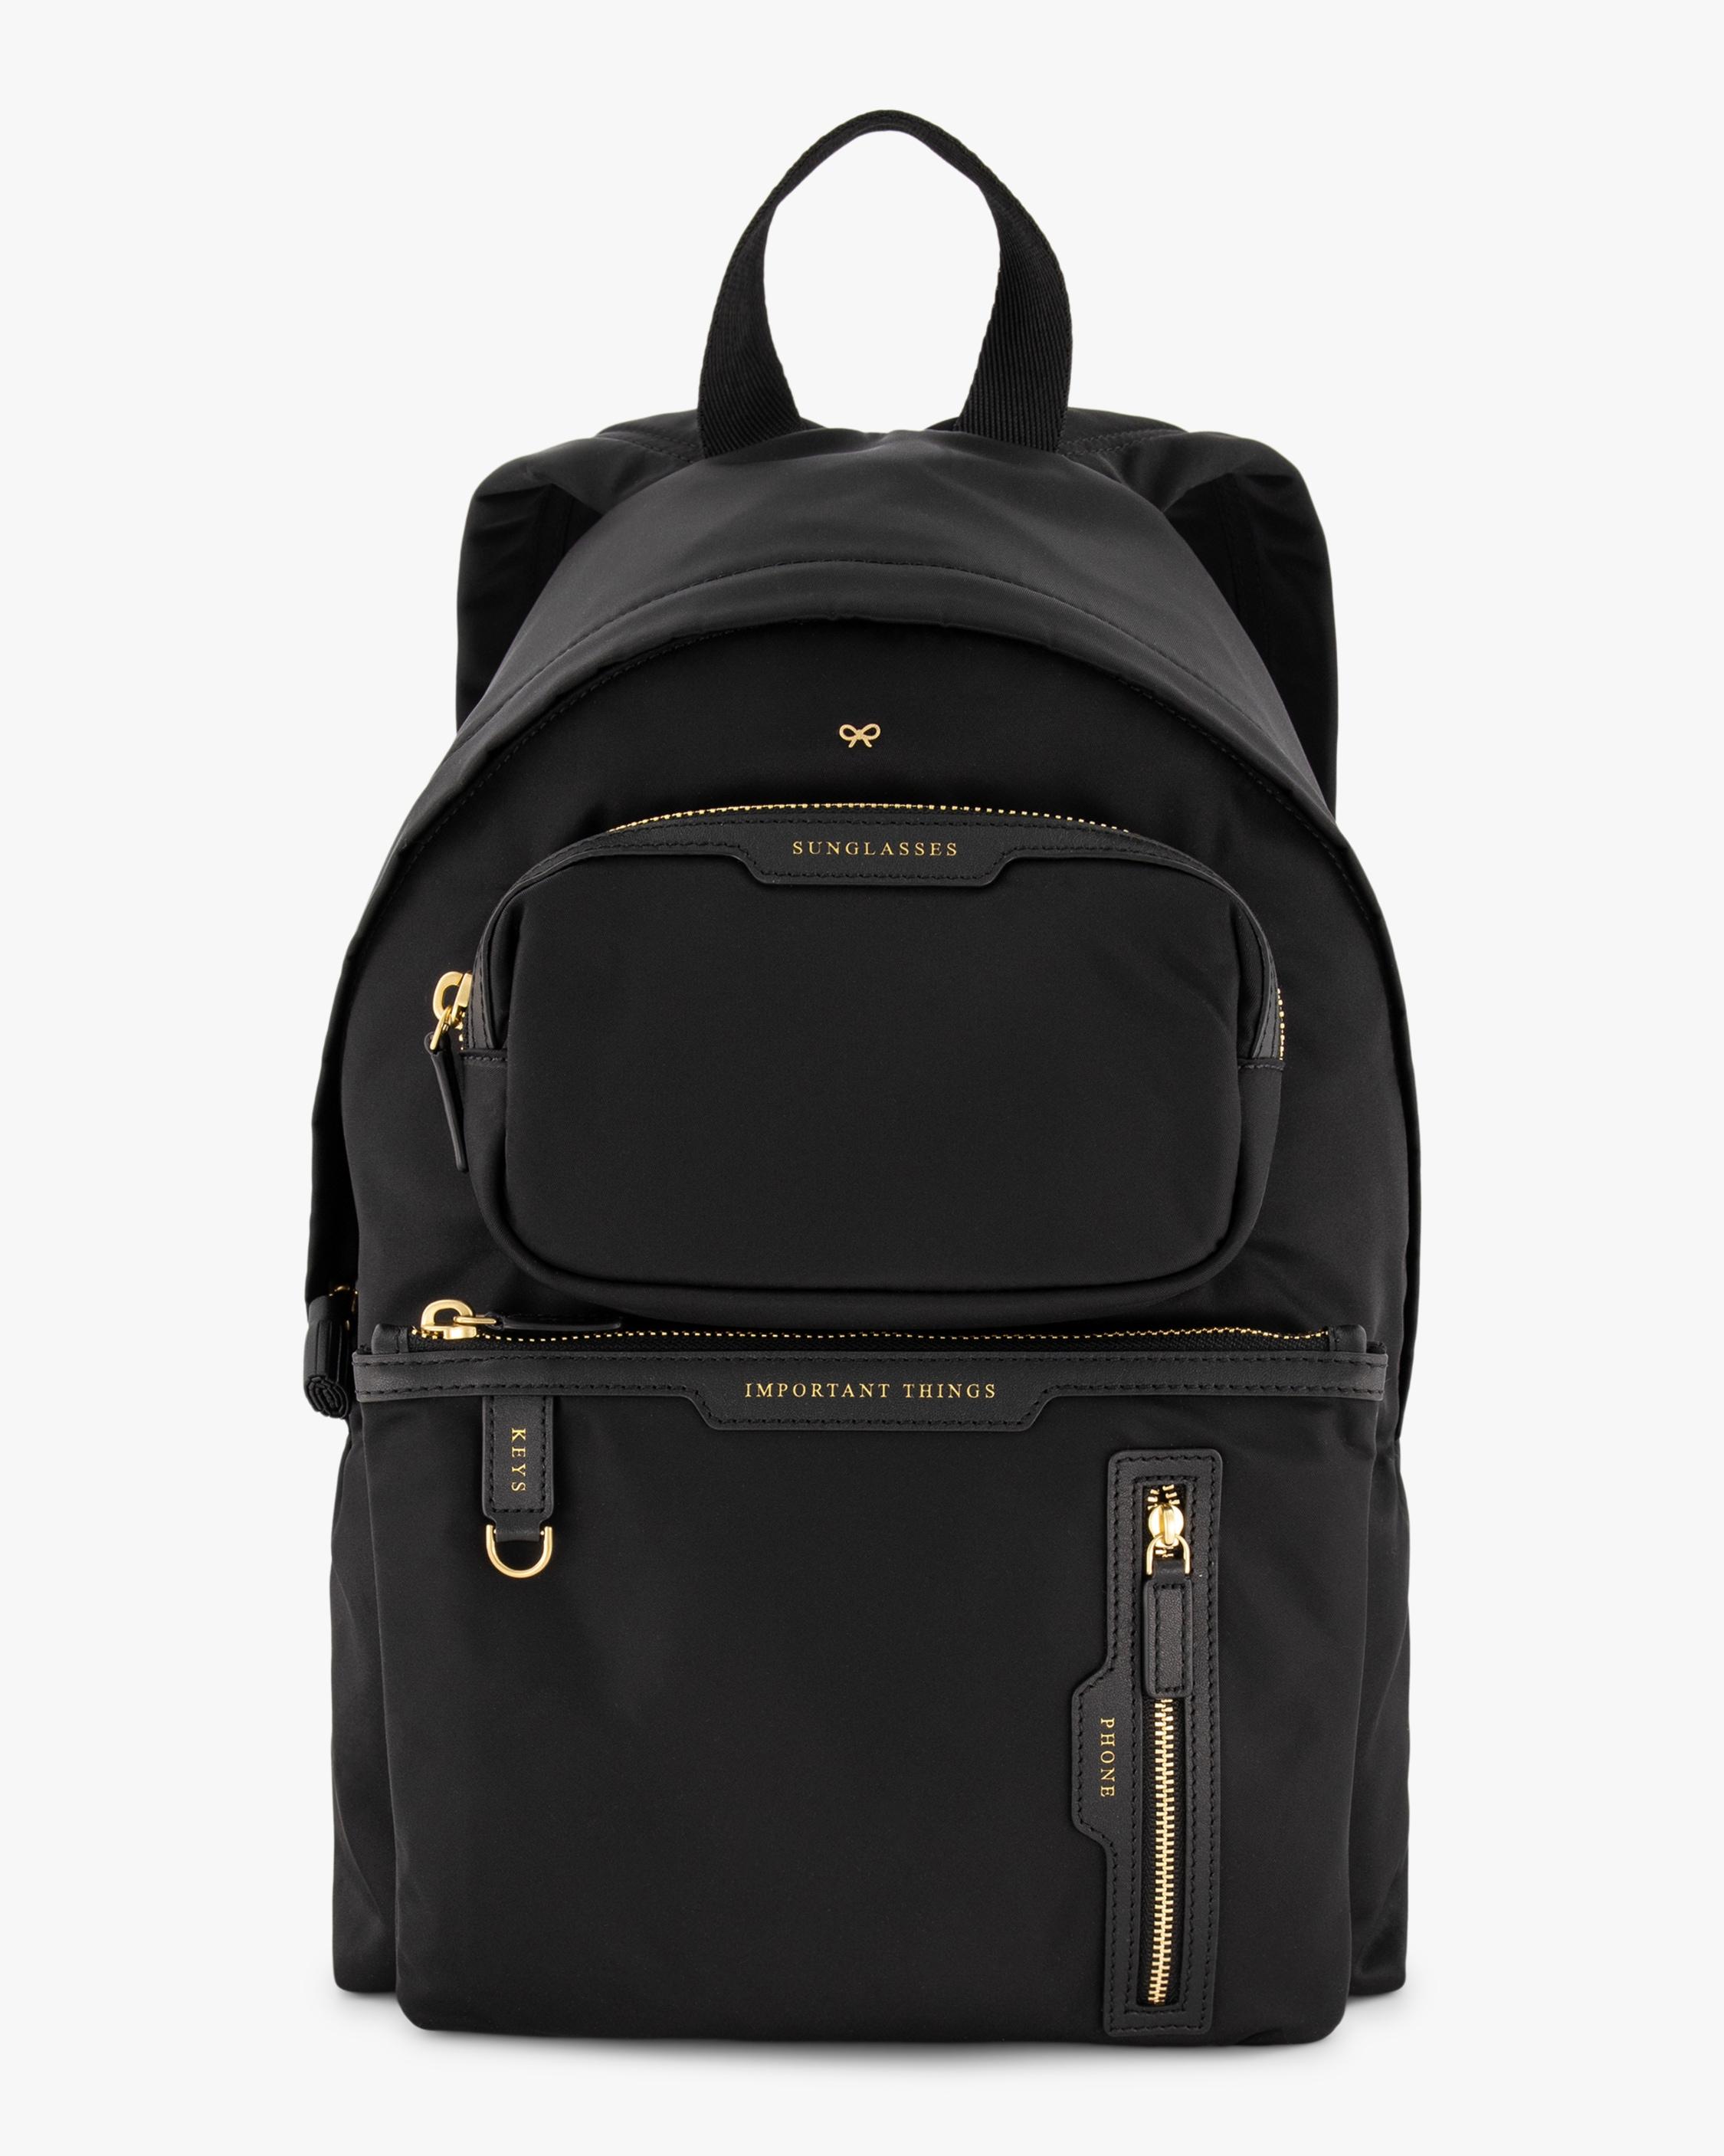 Anya Hindmarch Synthetic Multi-pocket Nylon Backpack in Black - Lyst